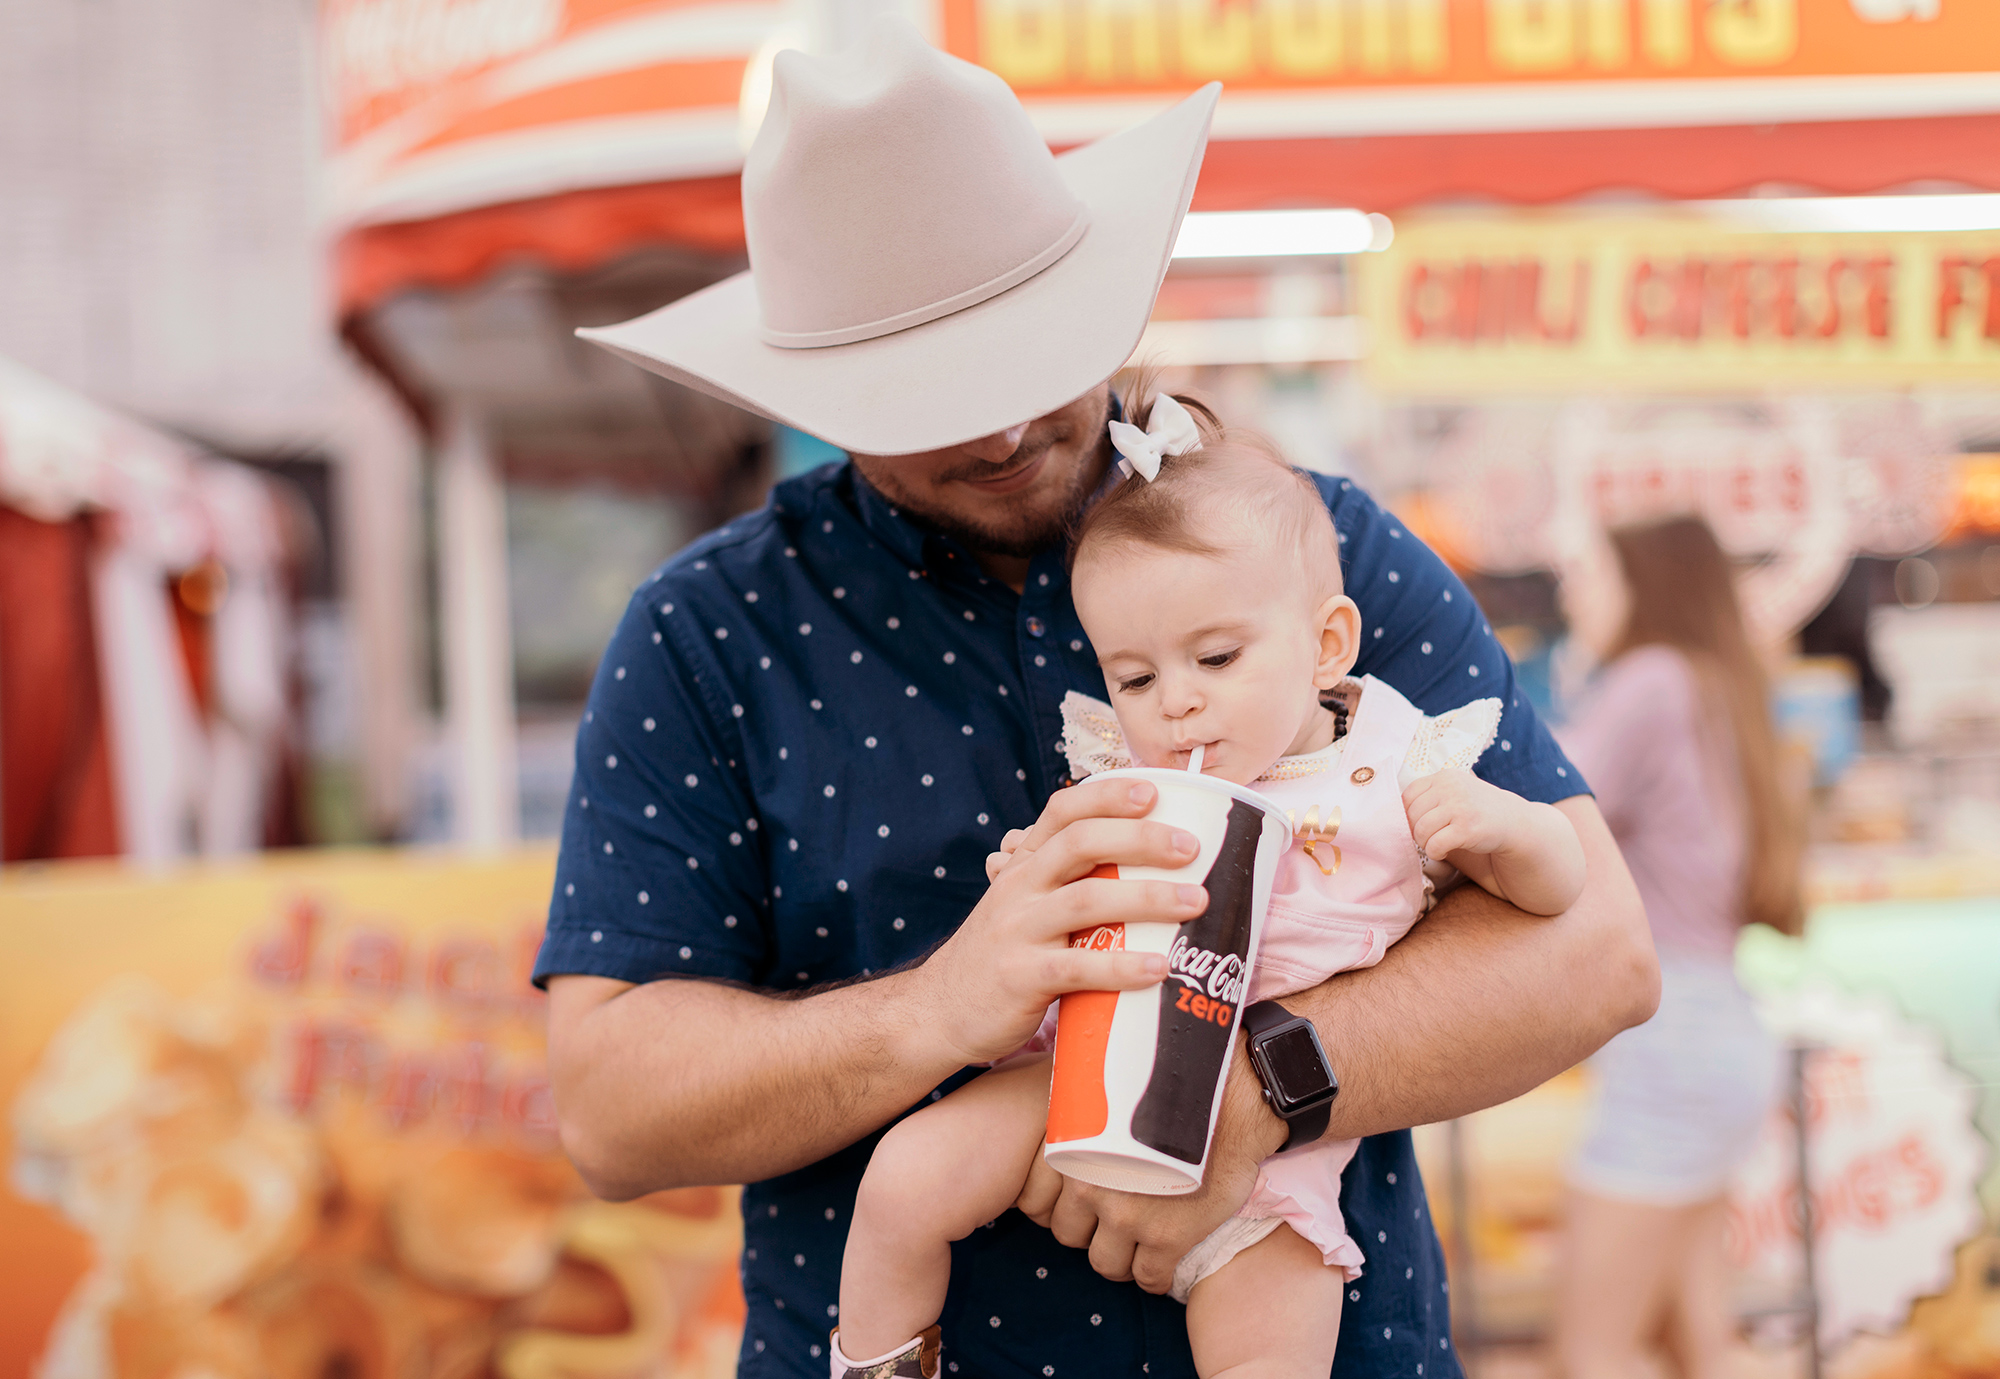 A Houston rodeo carnival attendee lets his baby daughter sip from a soda cup, photographed by Todd Spoth on location at the Houston Rodeo.